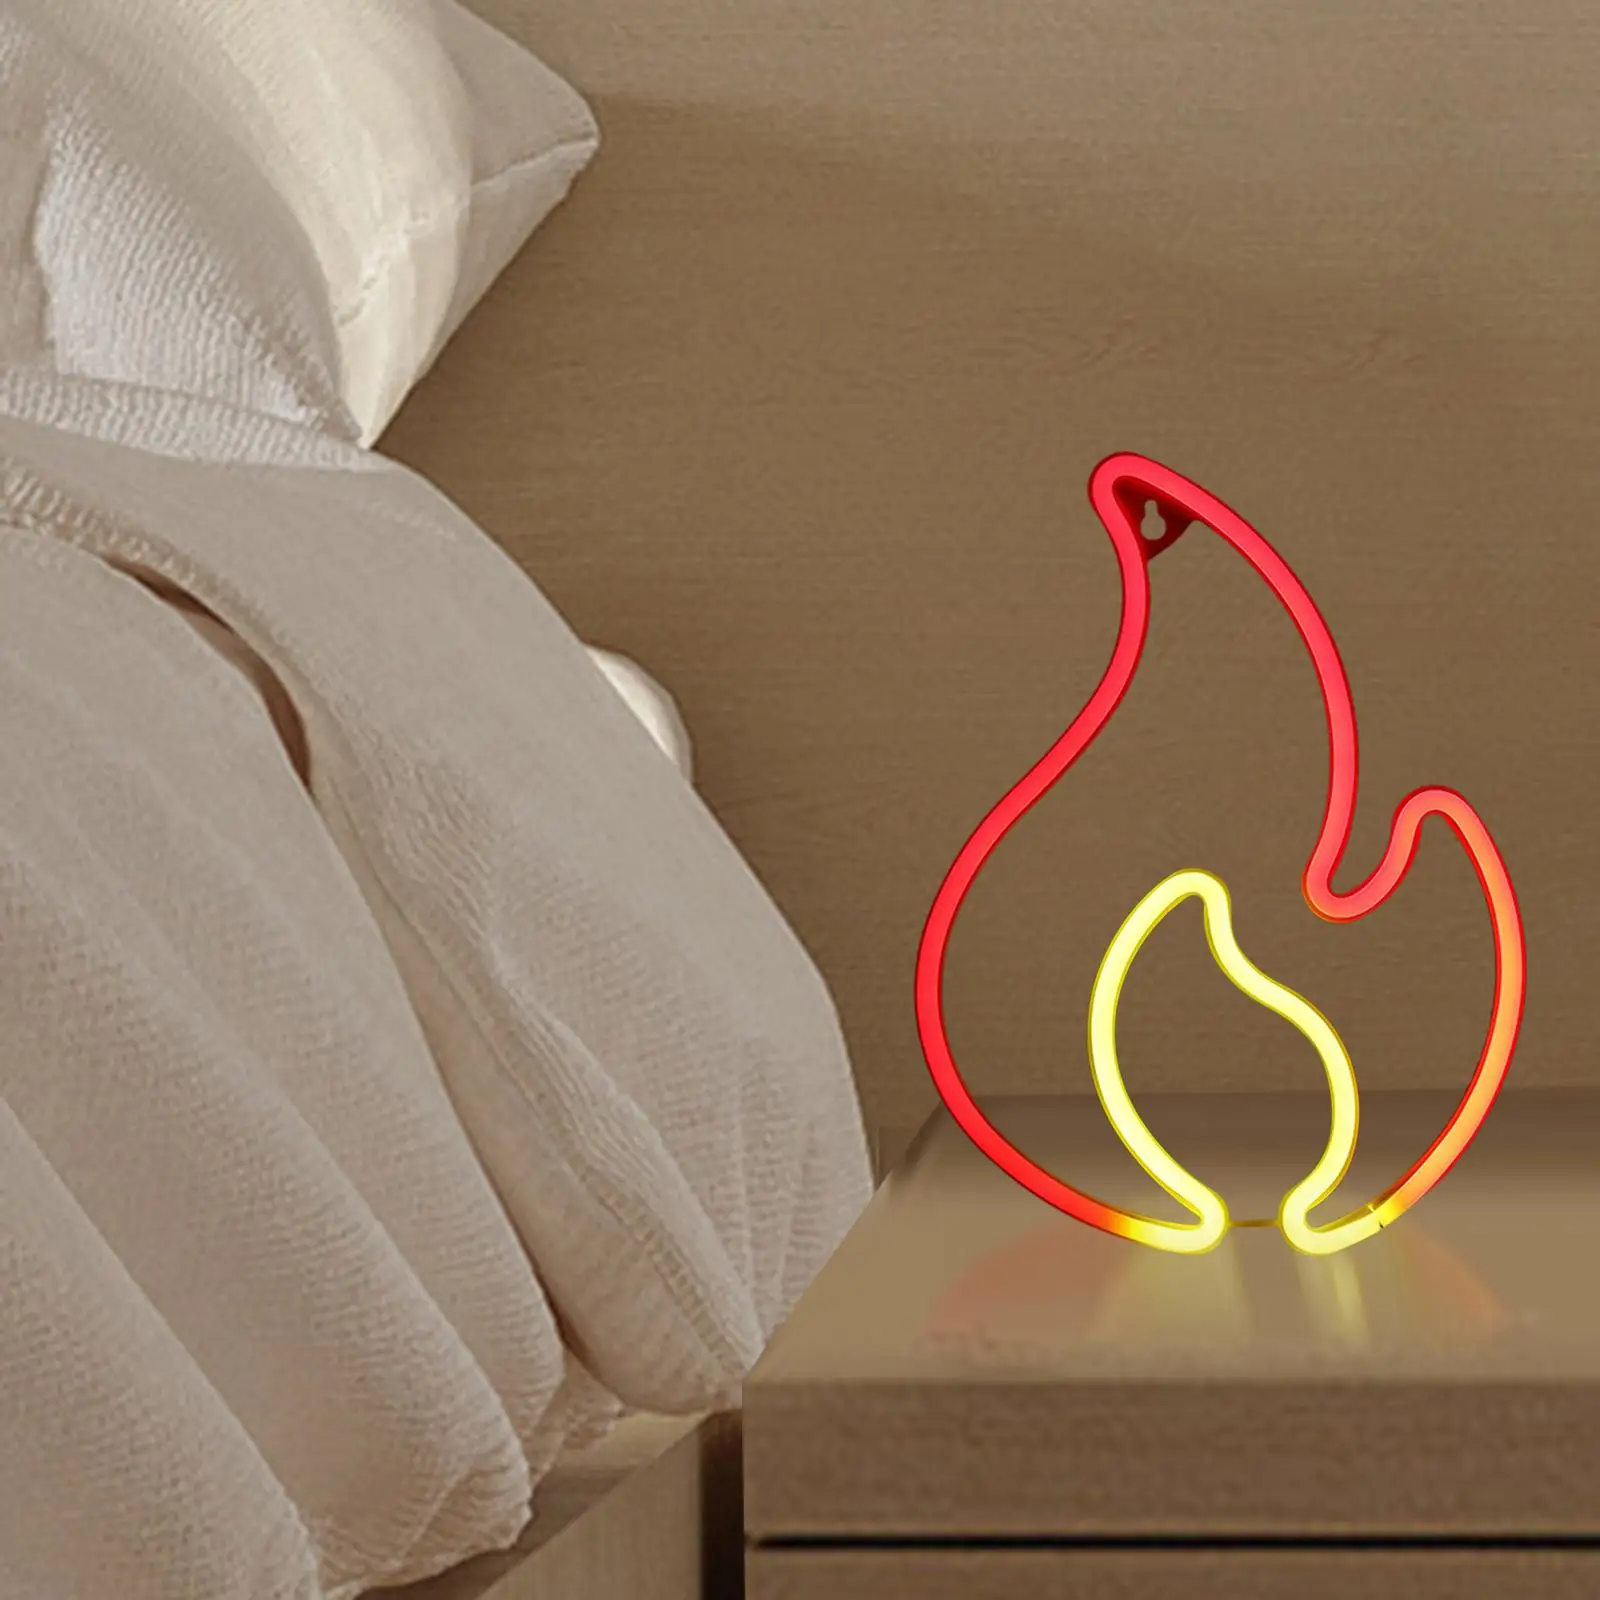 Yellow and Red Flame Neon Sign for Wall Decoration Hanging Flame Shaped Light